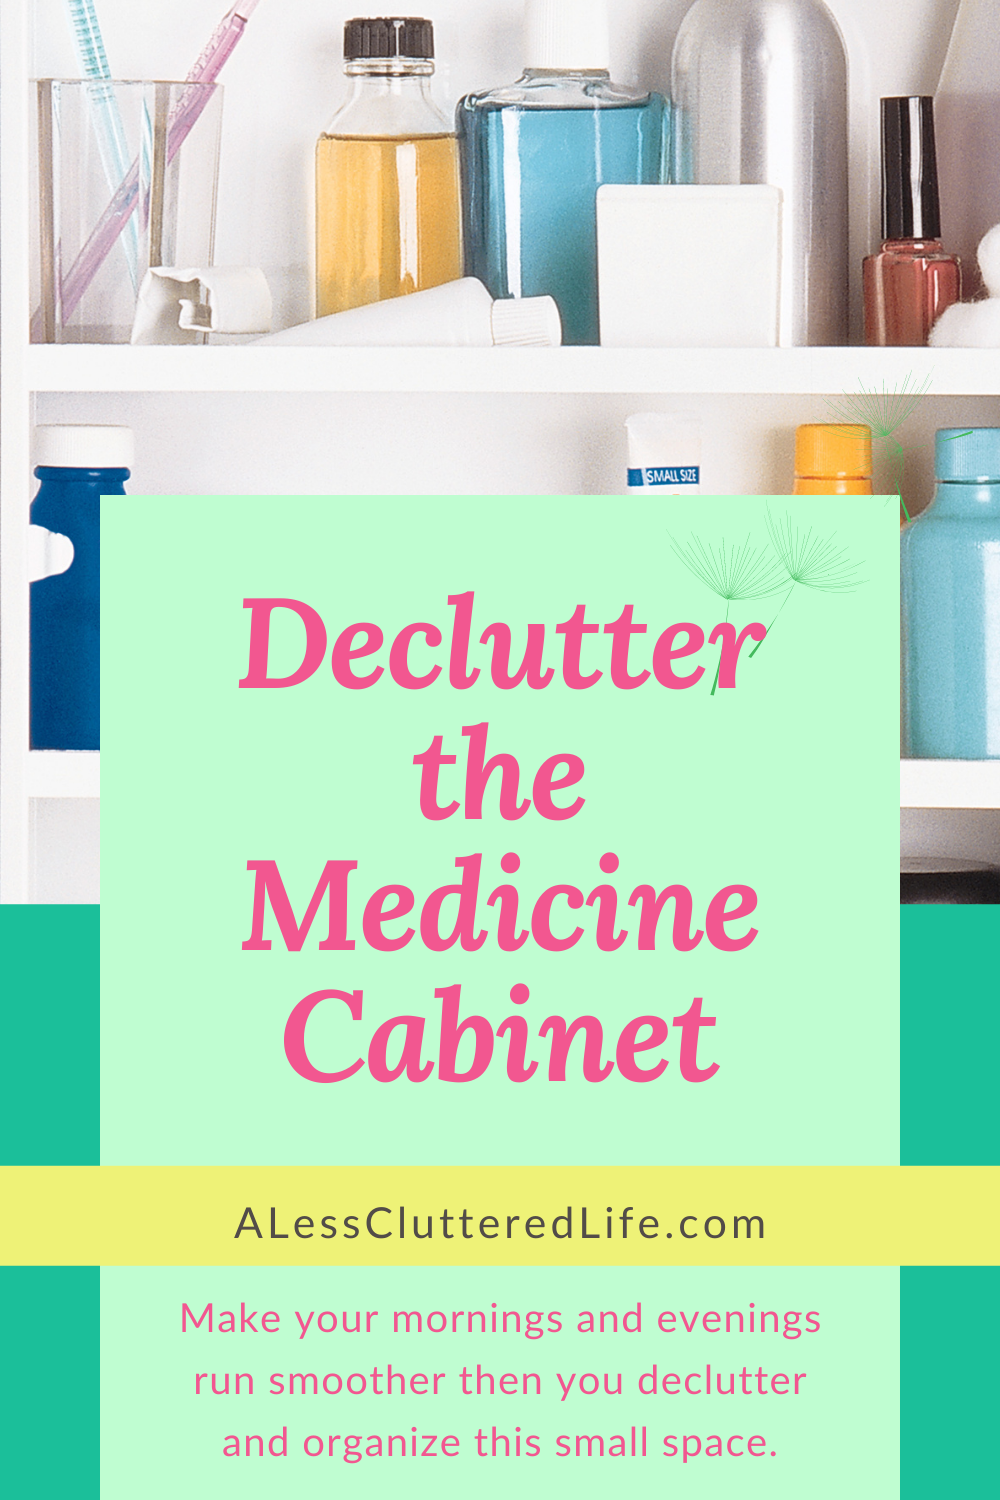 Pinterest graphic for decluttering the medicine cabinet.